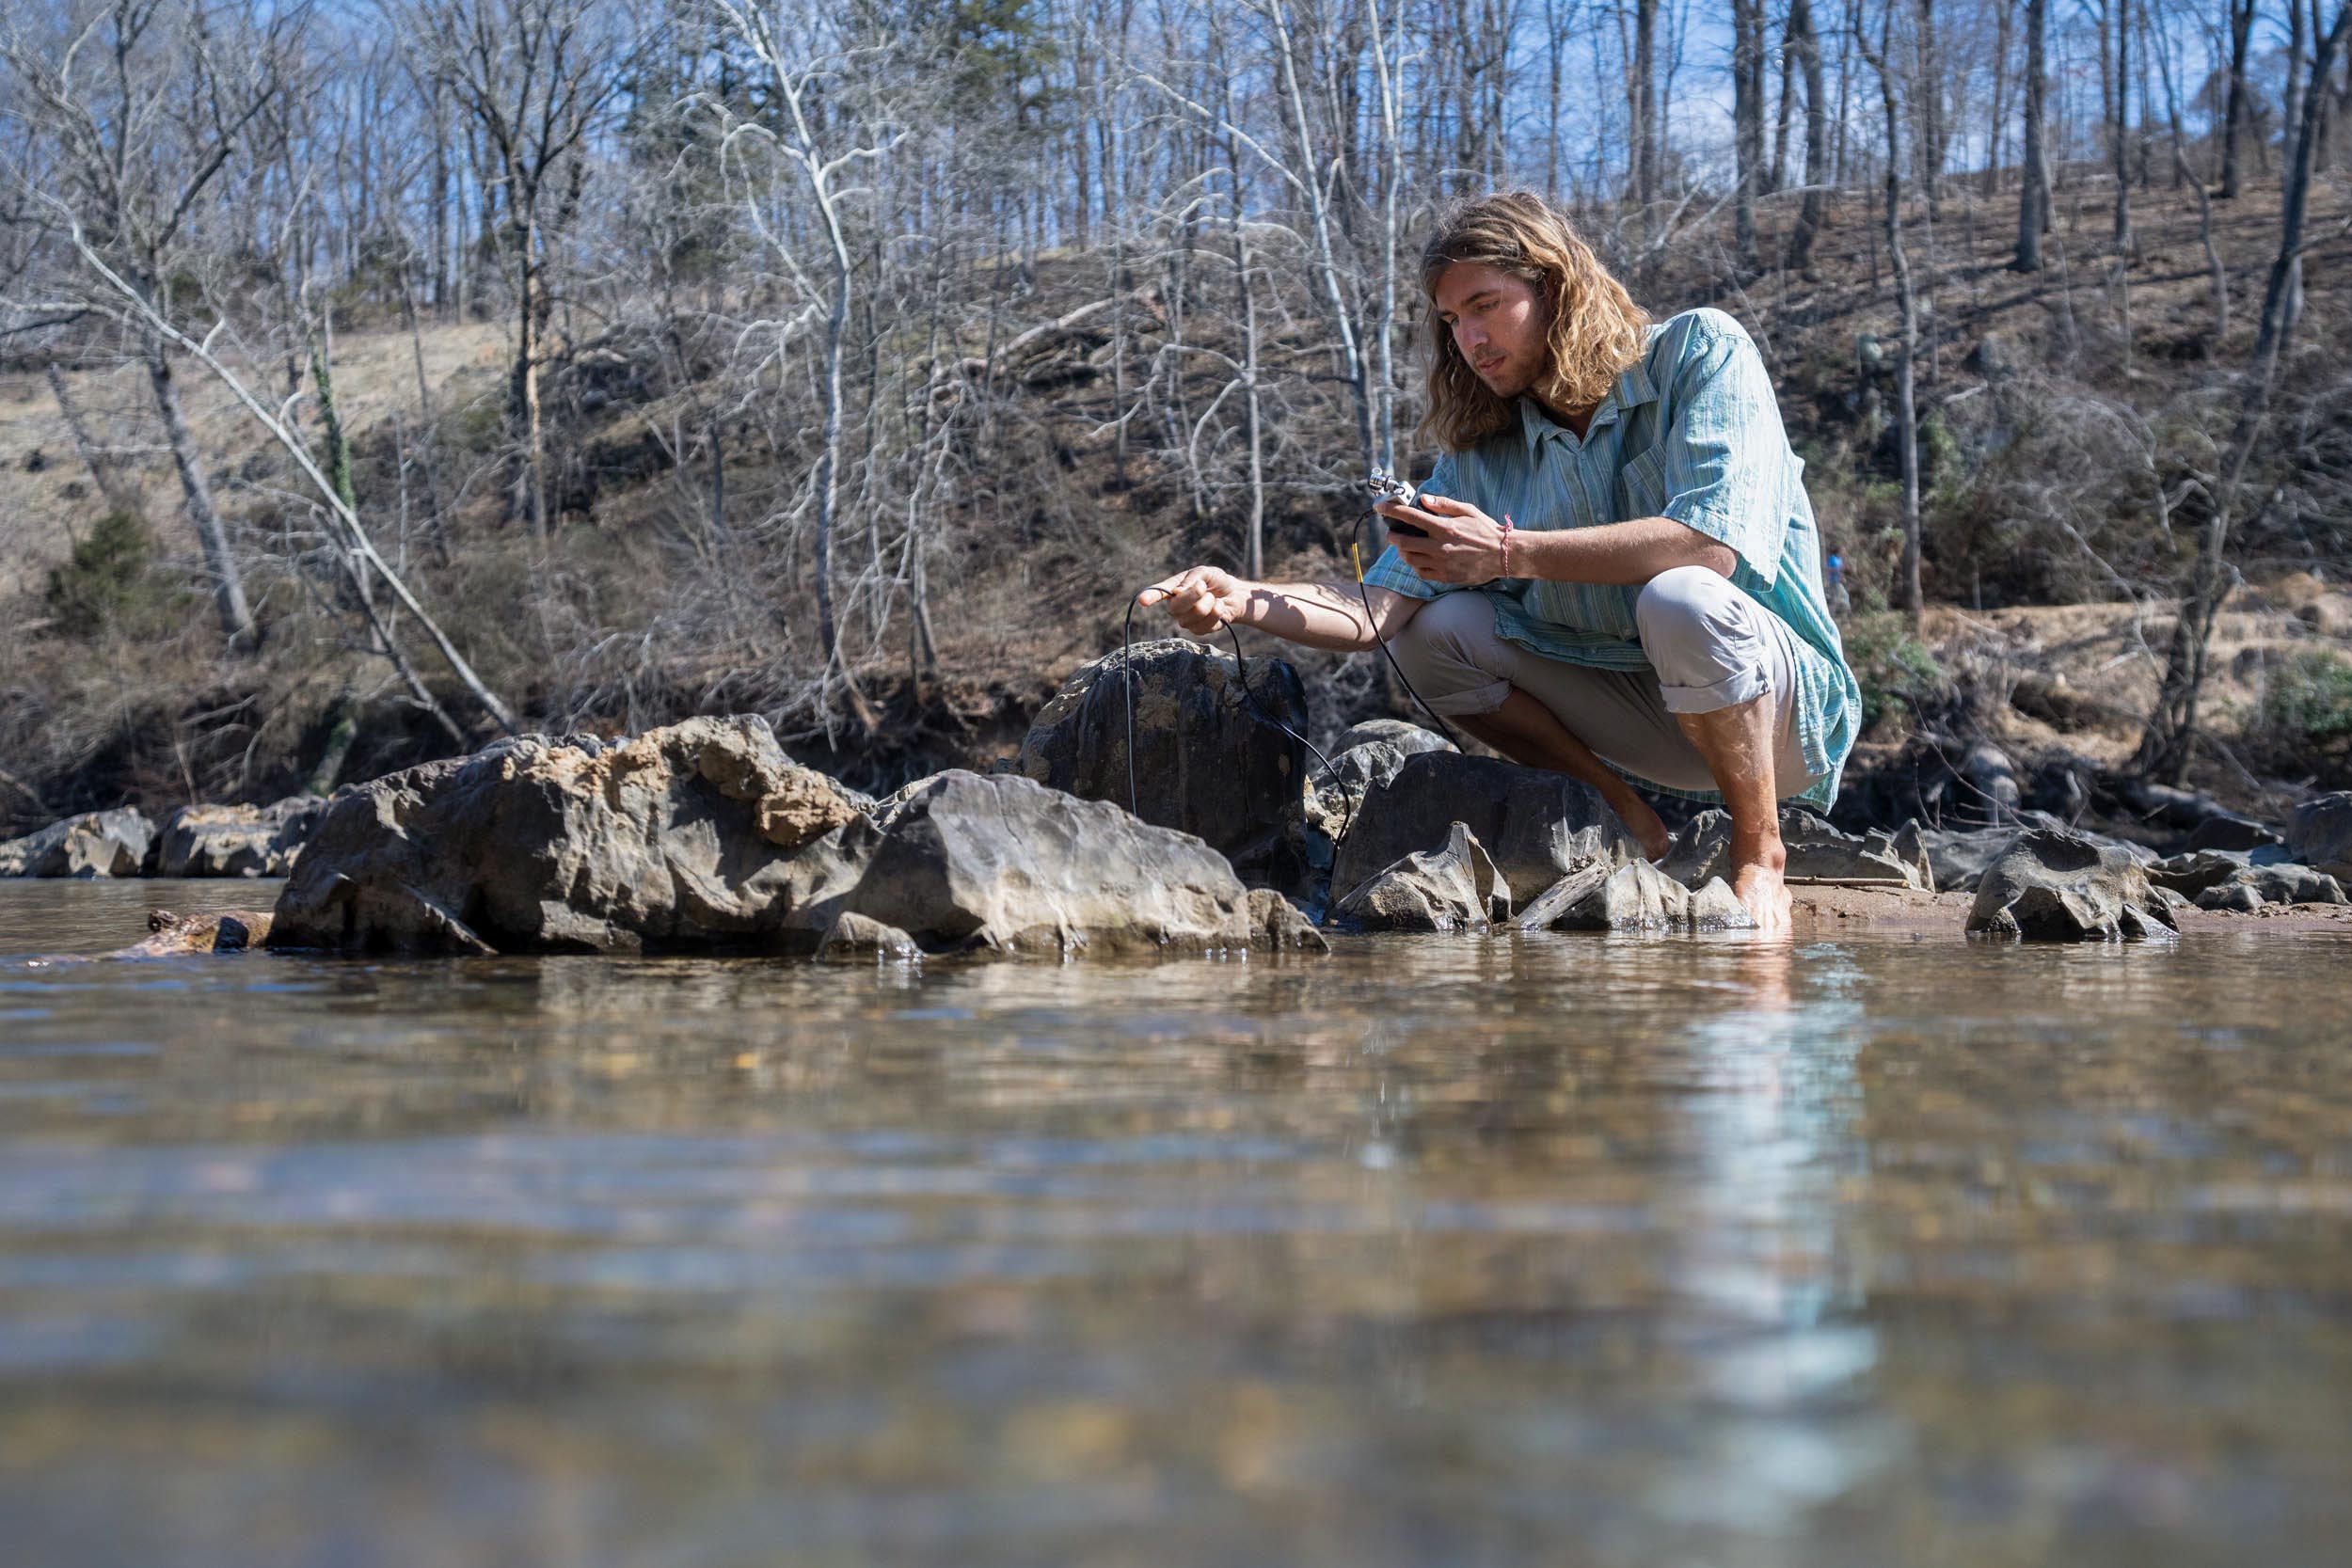 UVA student Davis Coffee squats next to a creek, holding a device whose cable runs into the water